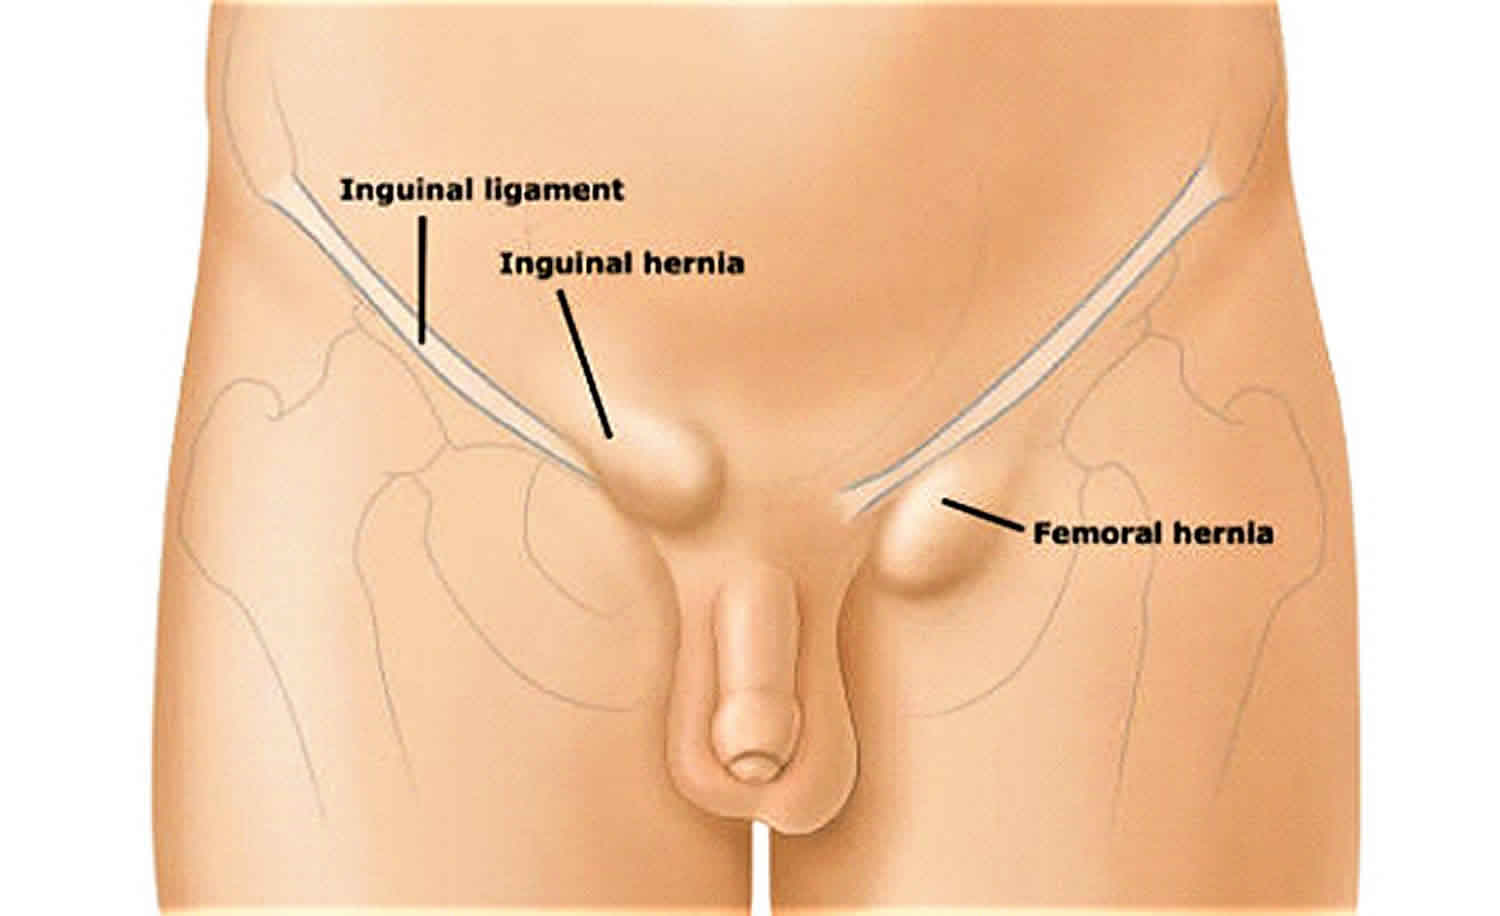 Lump in groin female and male, causes and diagnosis